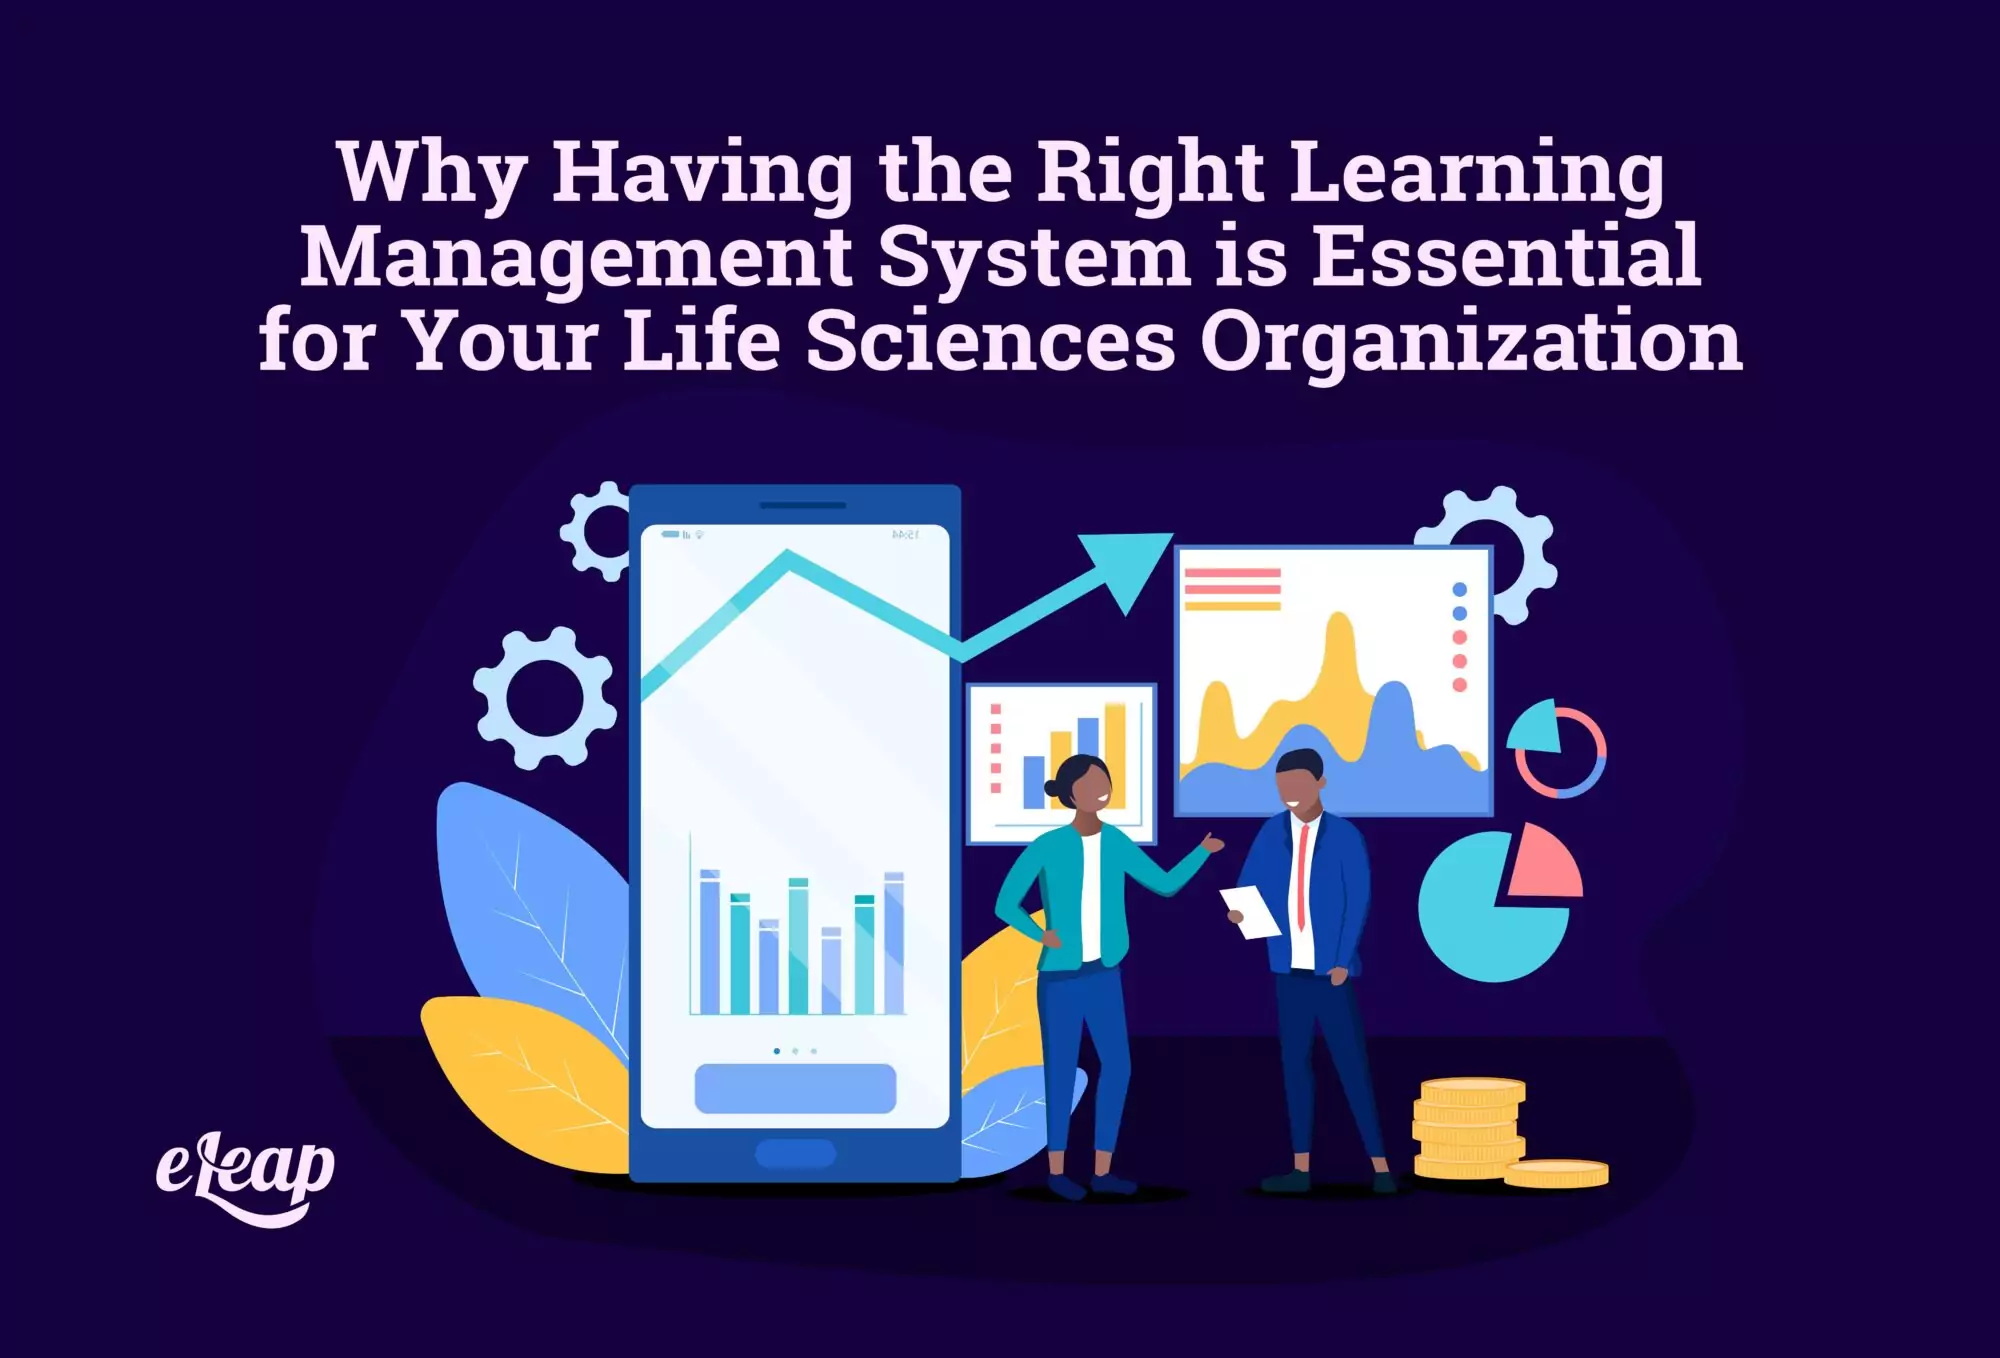 Why Having the Right Learning Management System is Essential for Your Life Sciences Organization